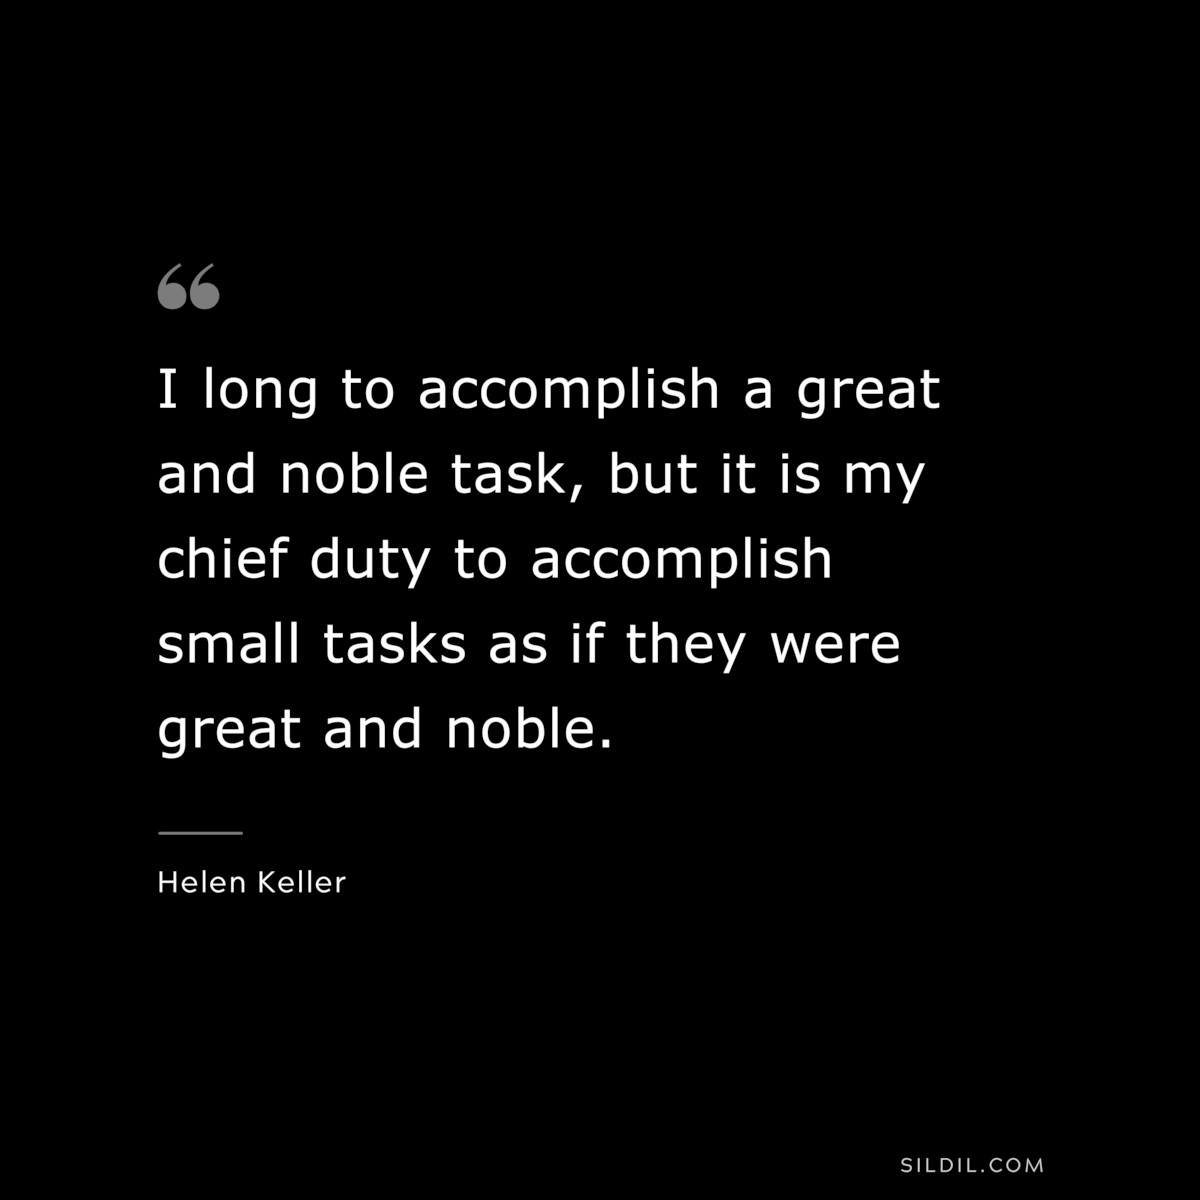 I long to accomplish a great and noble task, but it is my chief duty to accomplish small tasks as if they were great and noble. ― Helen Keller